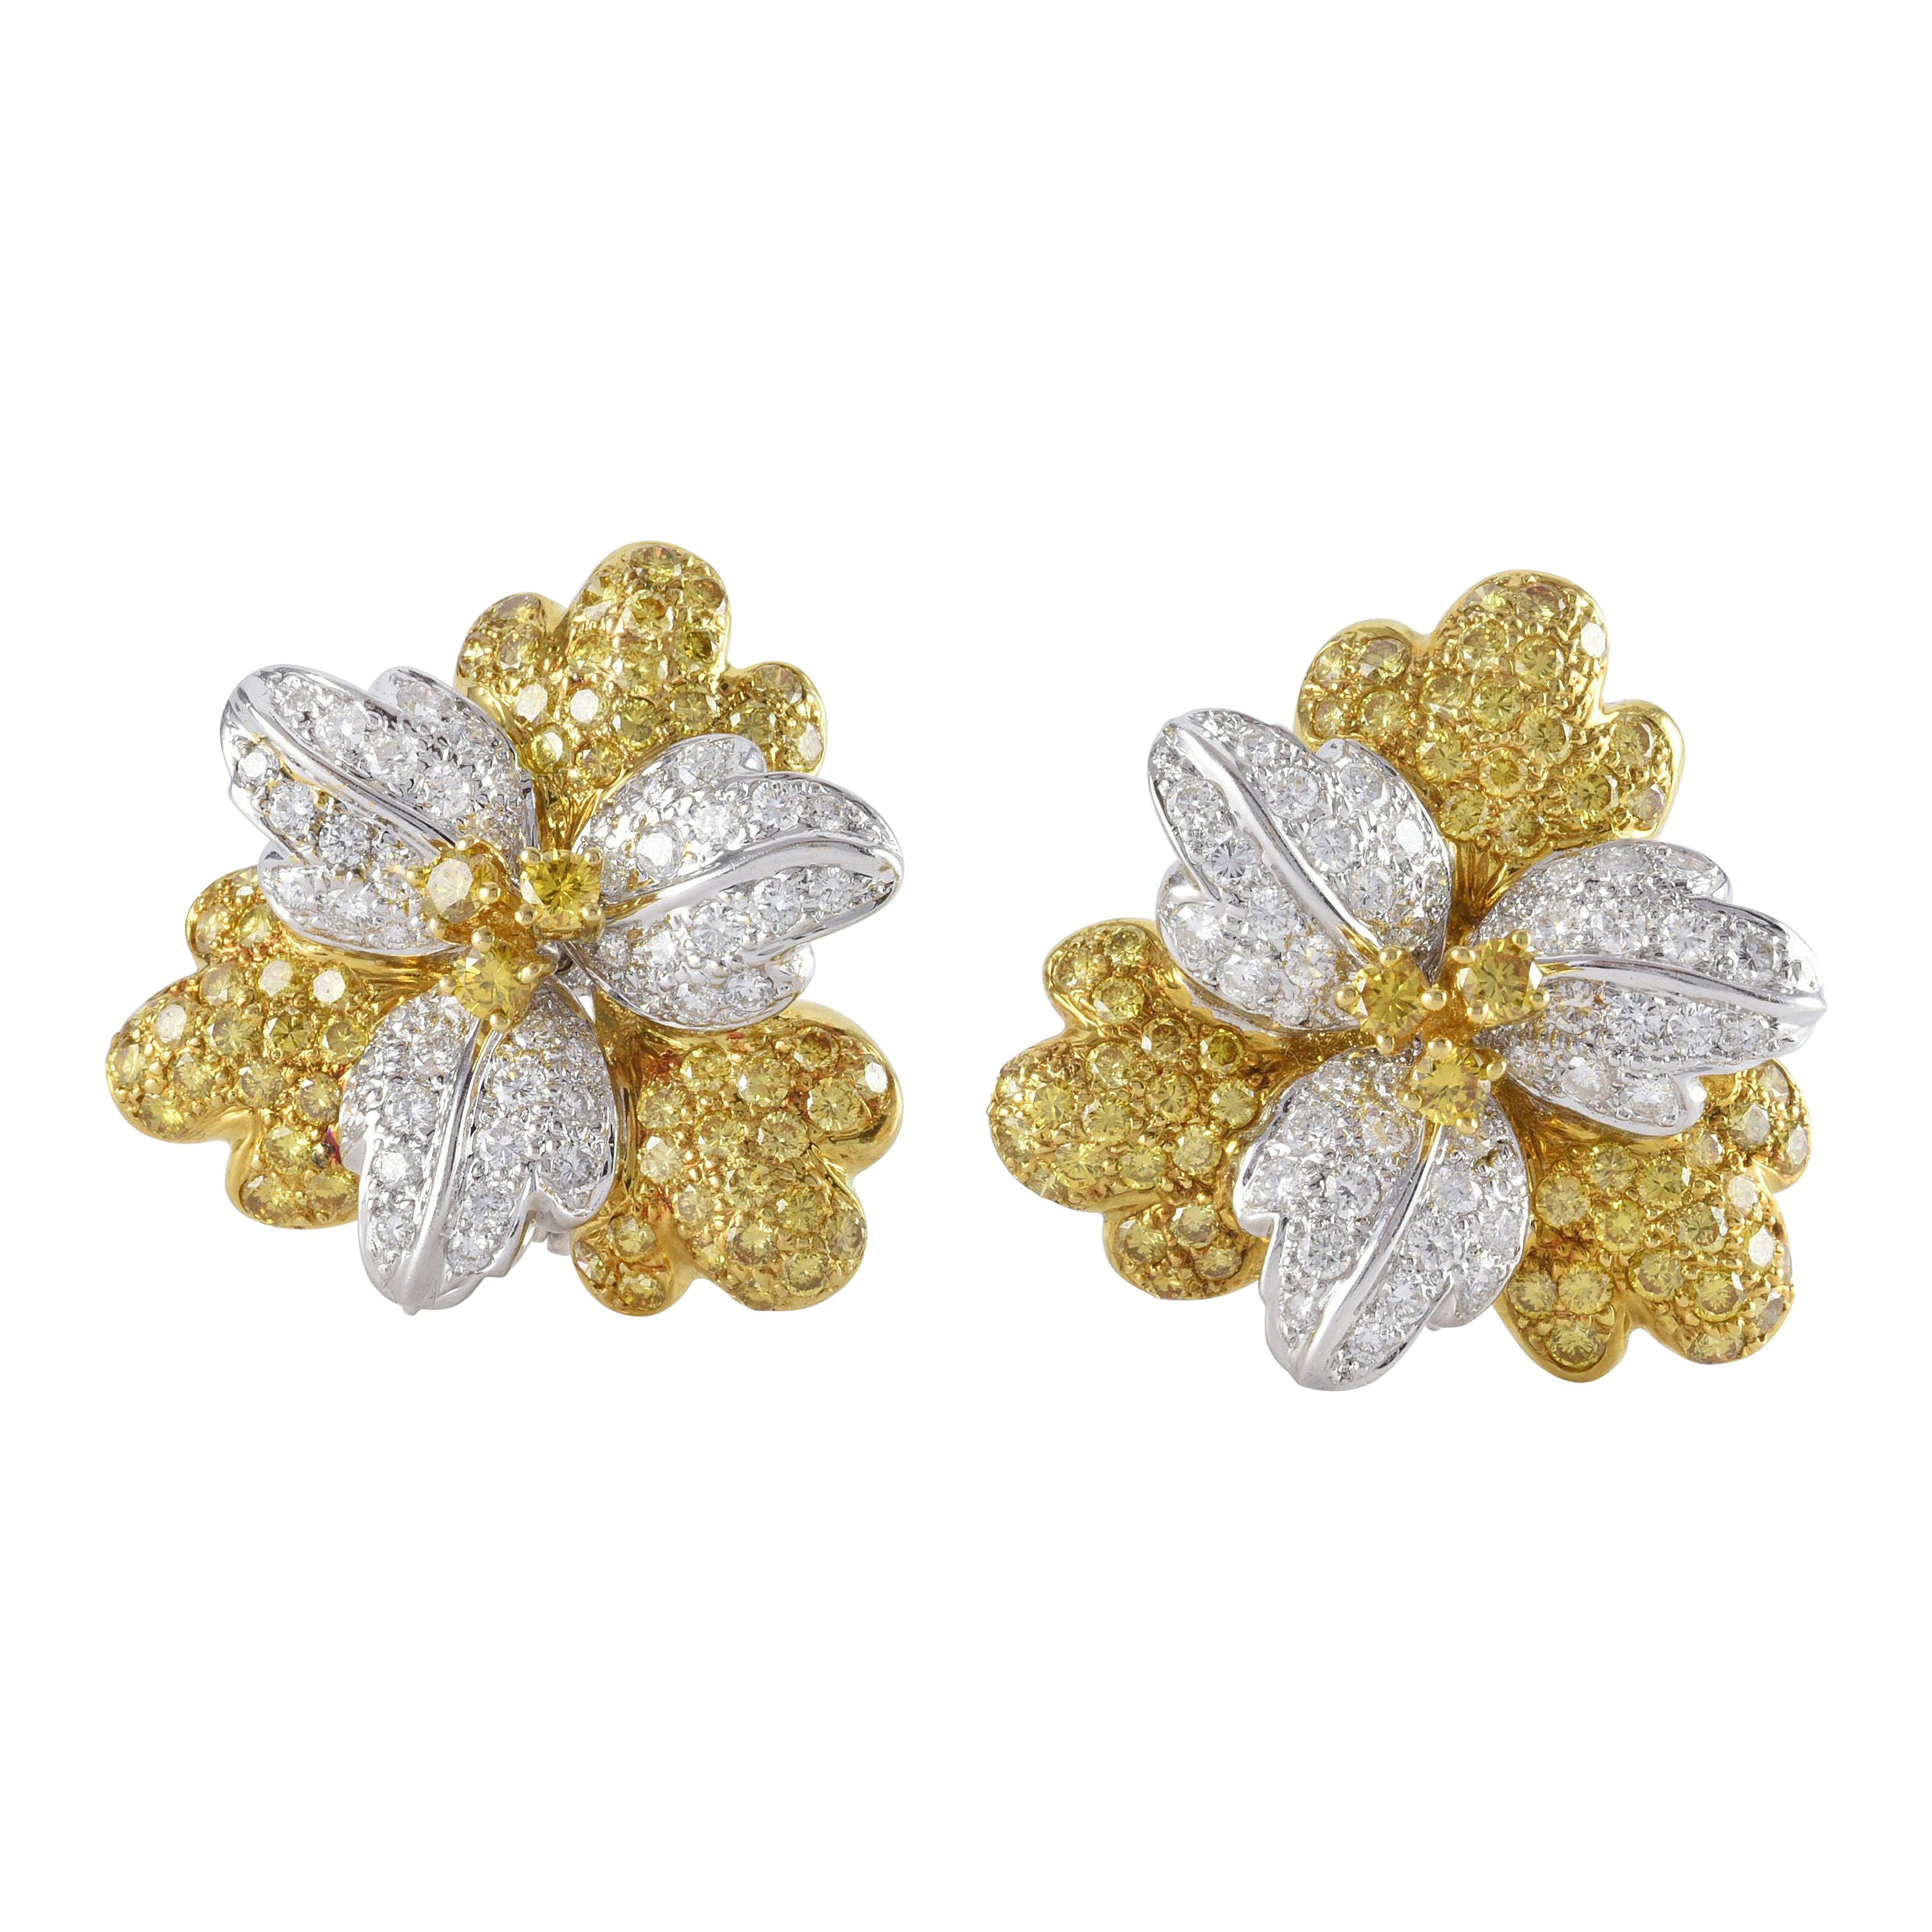 Fancy Yellow and White Diamond Flower Ear Clips 